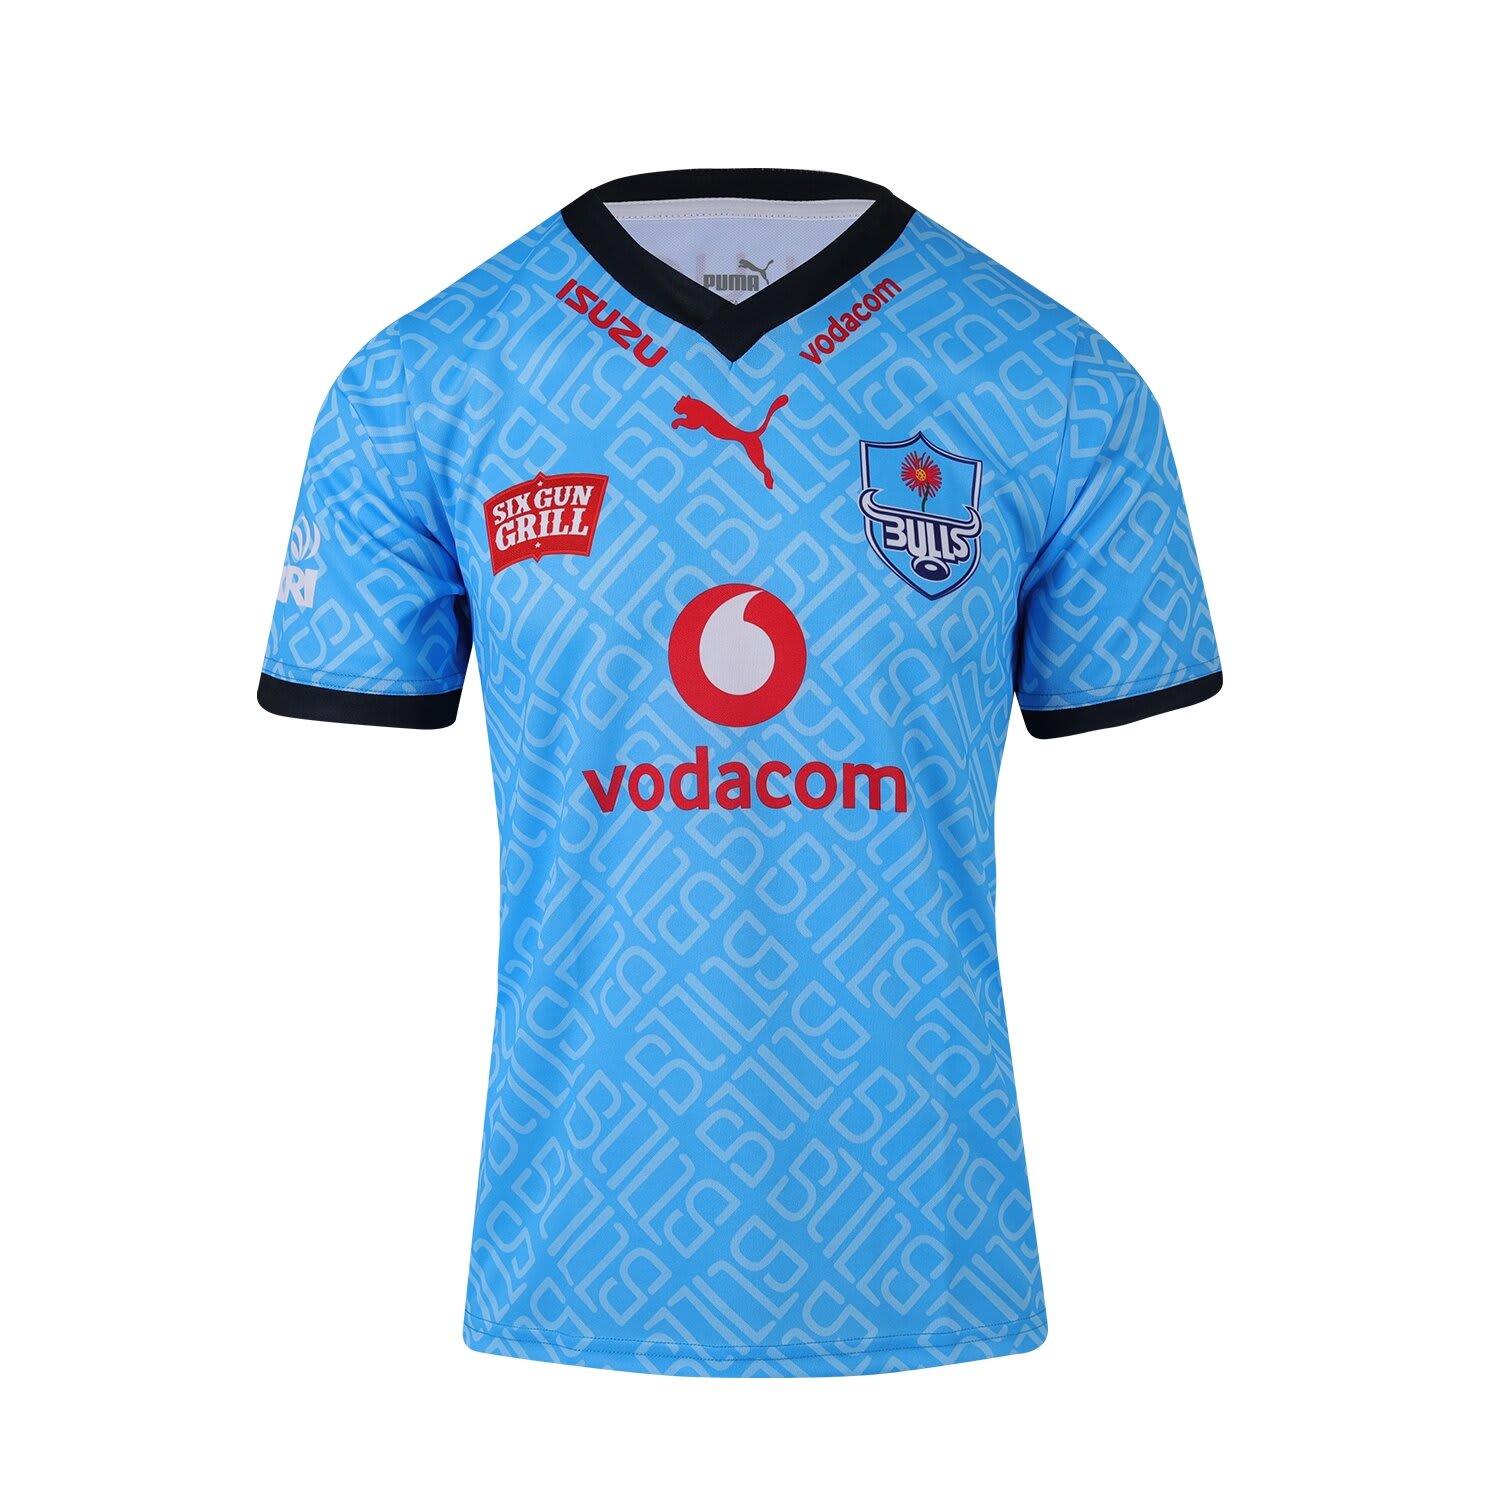 PICTURES] New Bulls rugby jersey